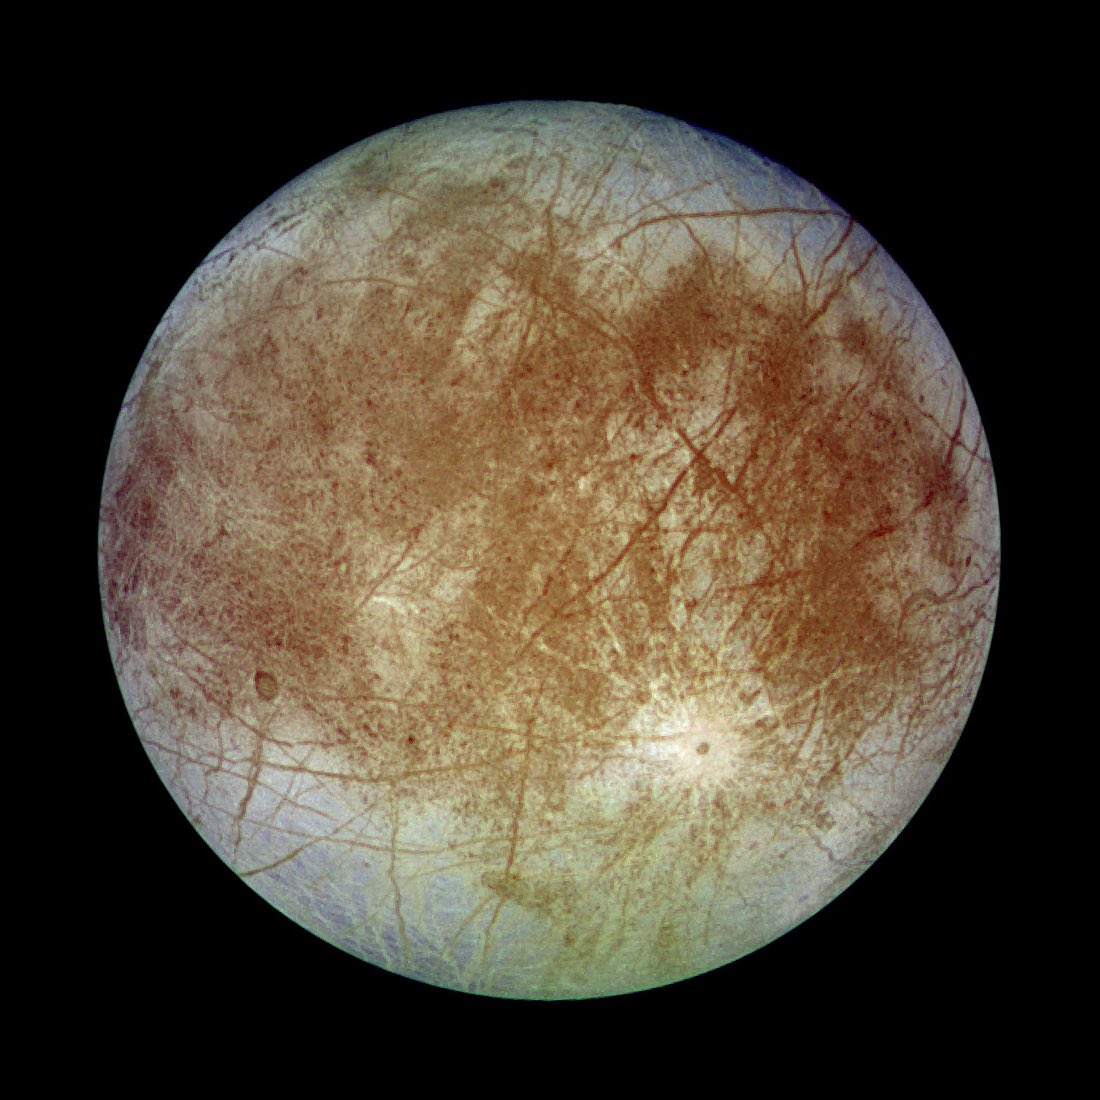 Europa is covered in ice but multiple lines of evidence suggest there’s a planet-wide subsurface ocean. If it moves like a duck, has a young and smooth surface like a duck, and seems to be coating areas with sea salt like a duck, it might have a subsurface ocean